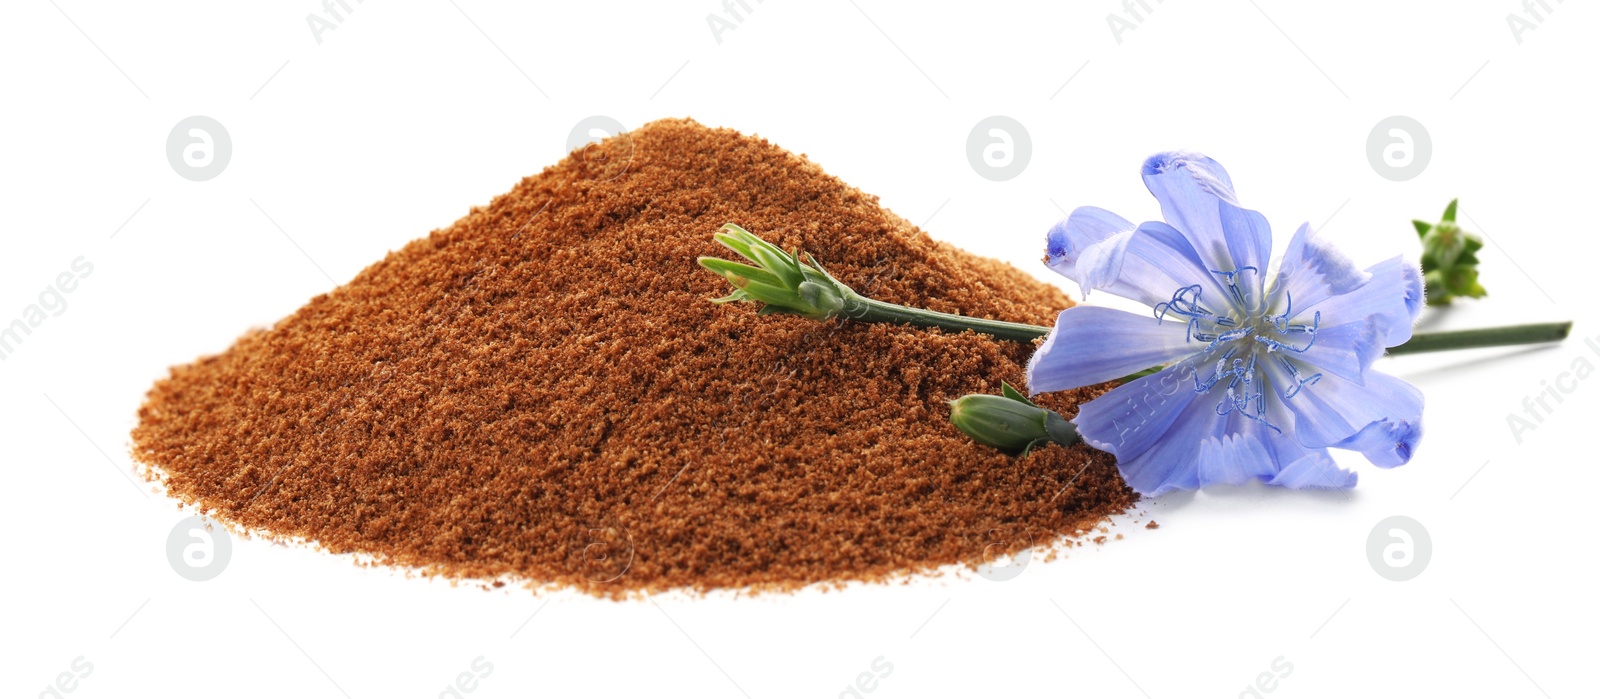 Photo of Pile of chicory powder and flower on white background